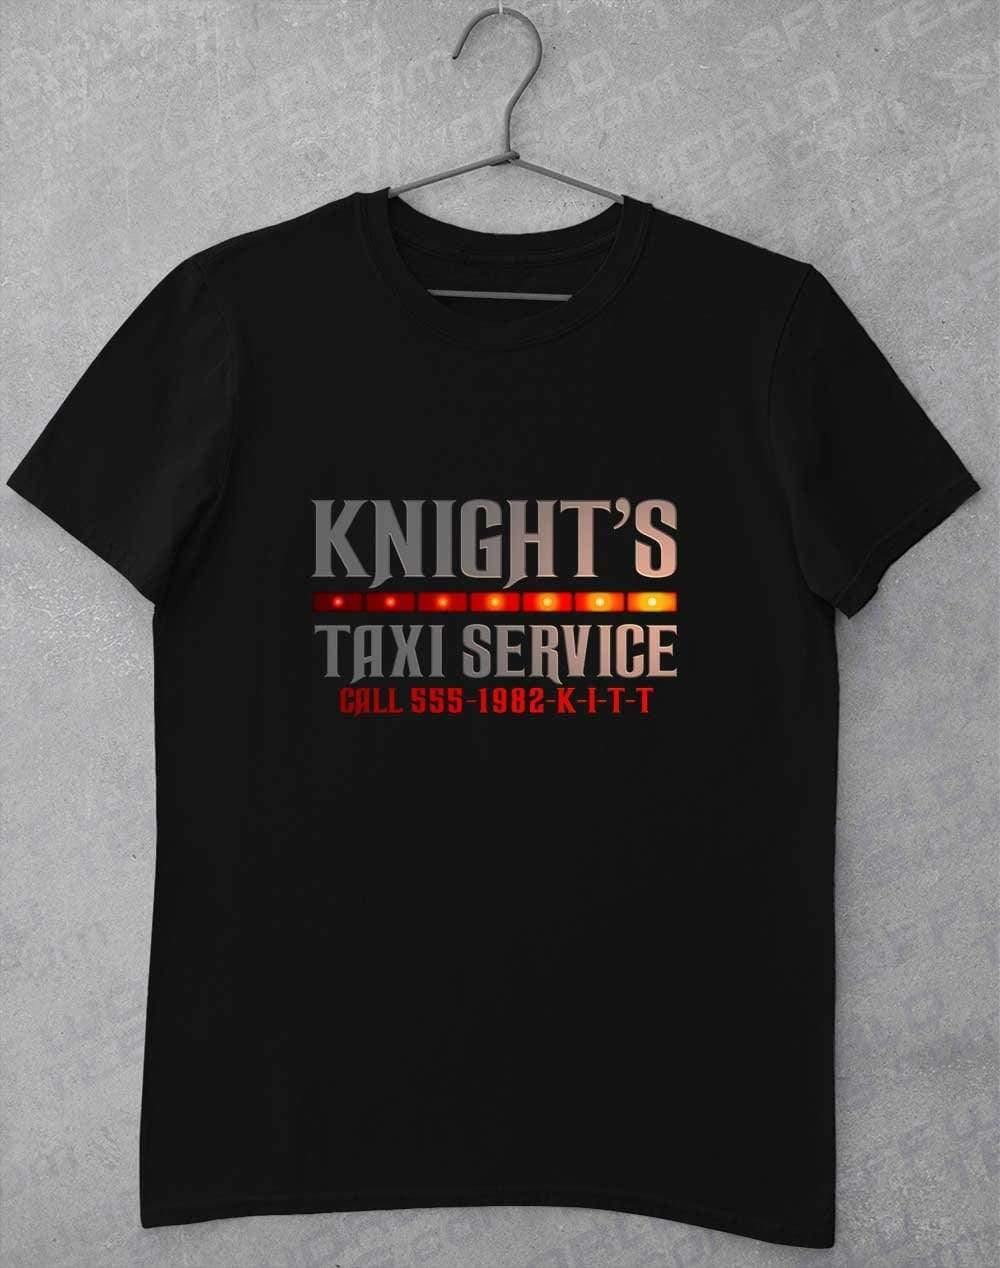 Knight's Taxi Sevice T-Shirt S / Black  - Off World Tees